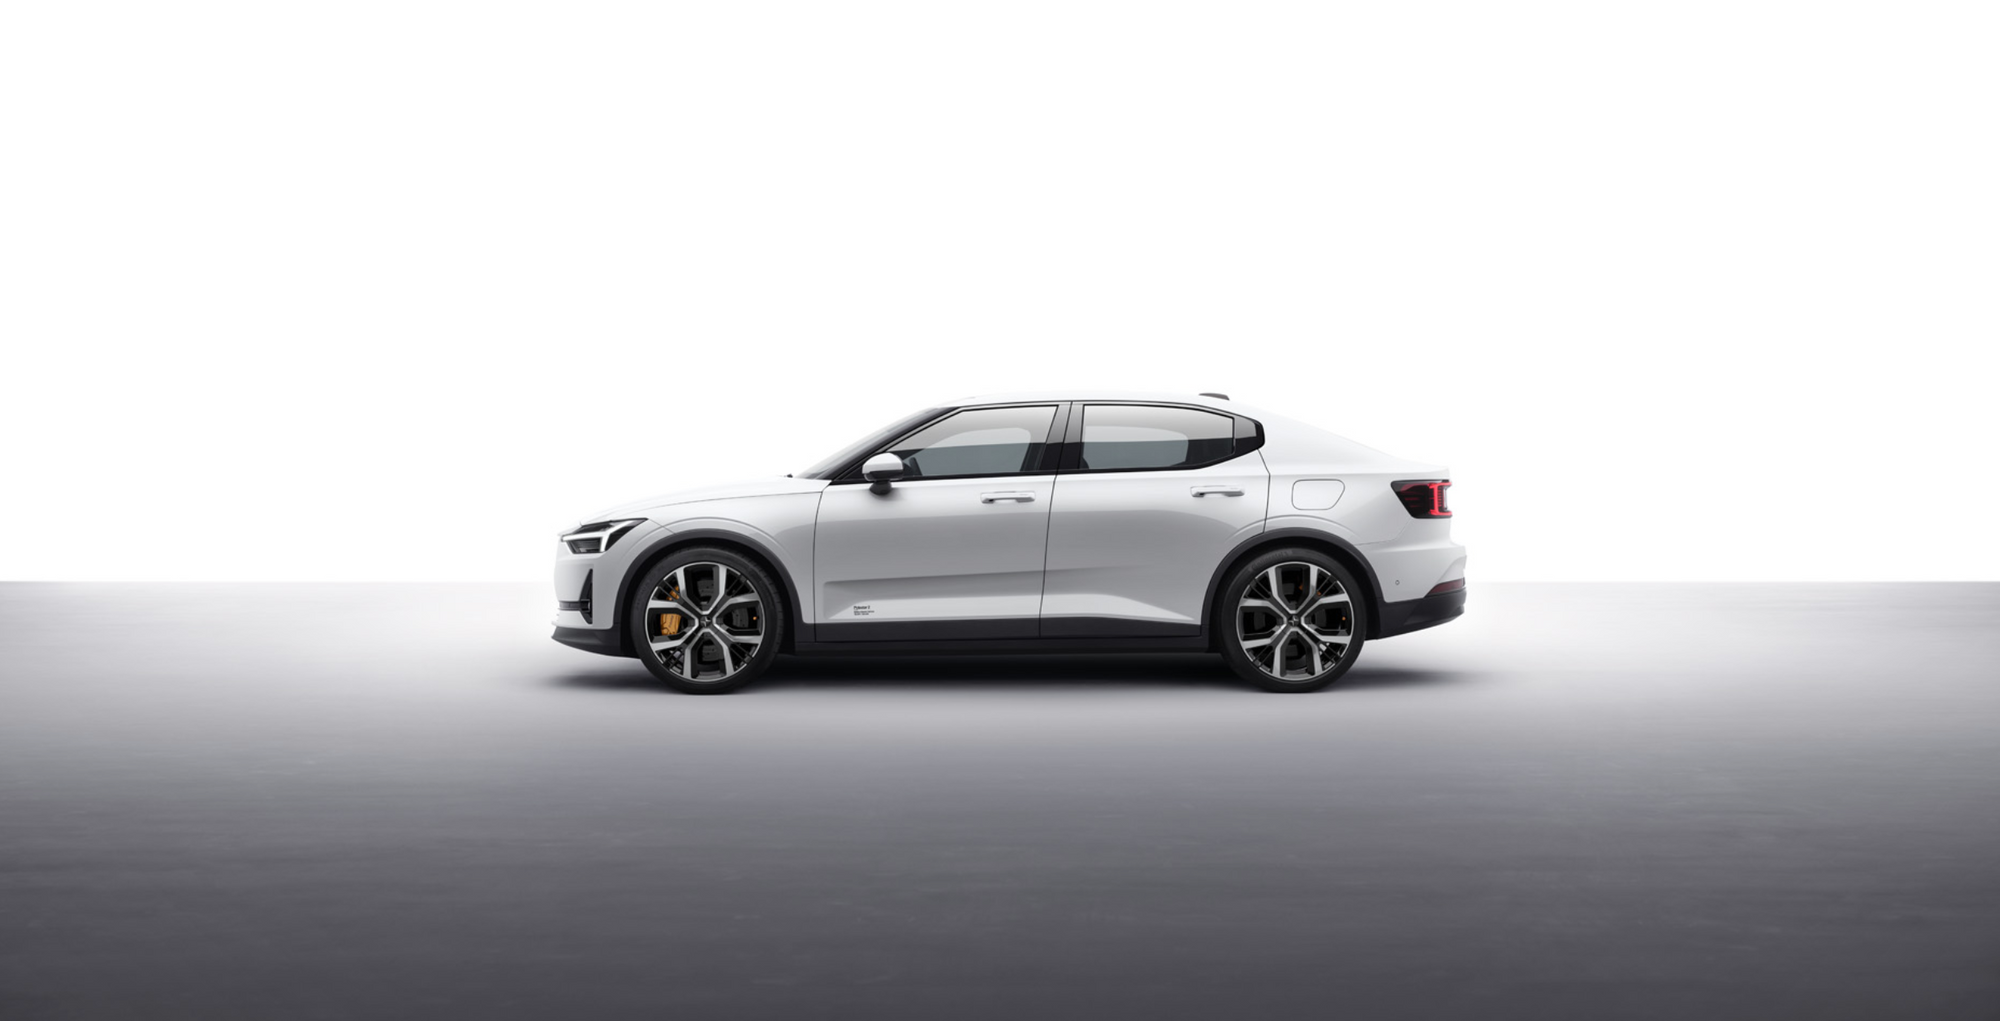 Polestar's Cuts 10% of Workforce: What Does It Mean For The P3 & P4 Cars?